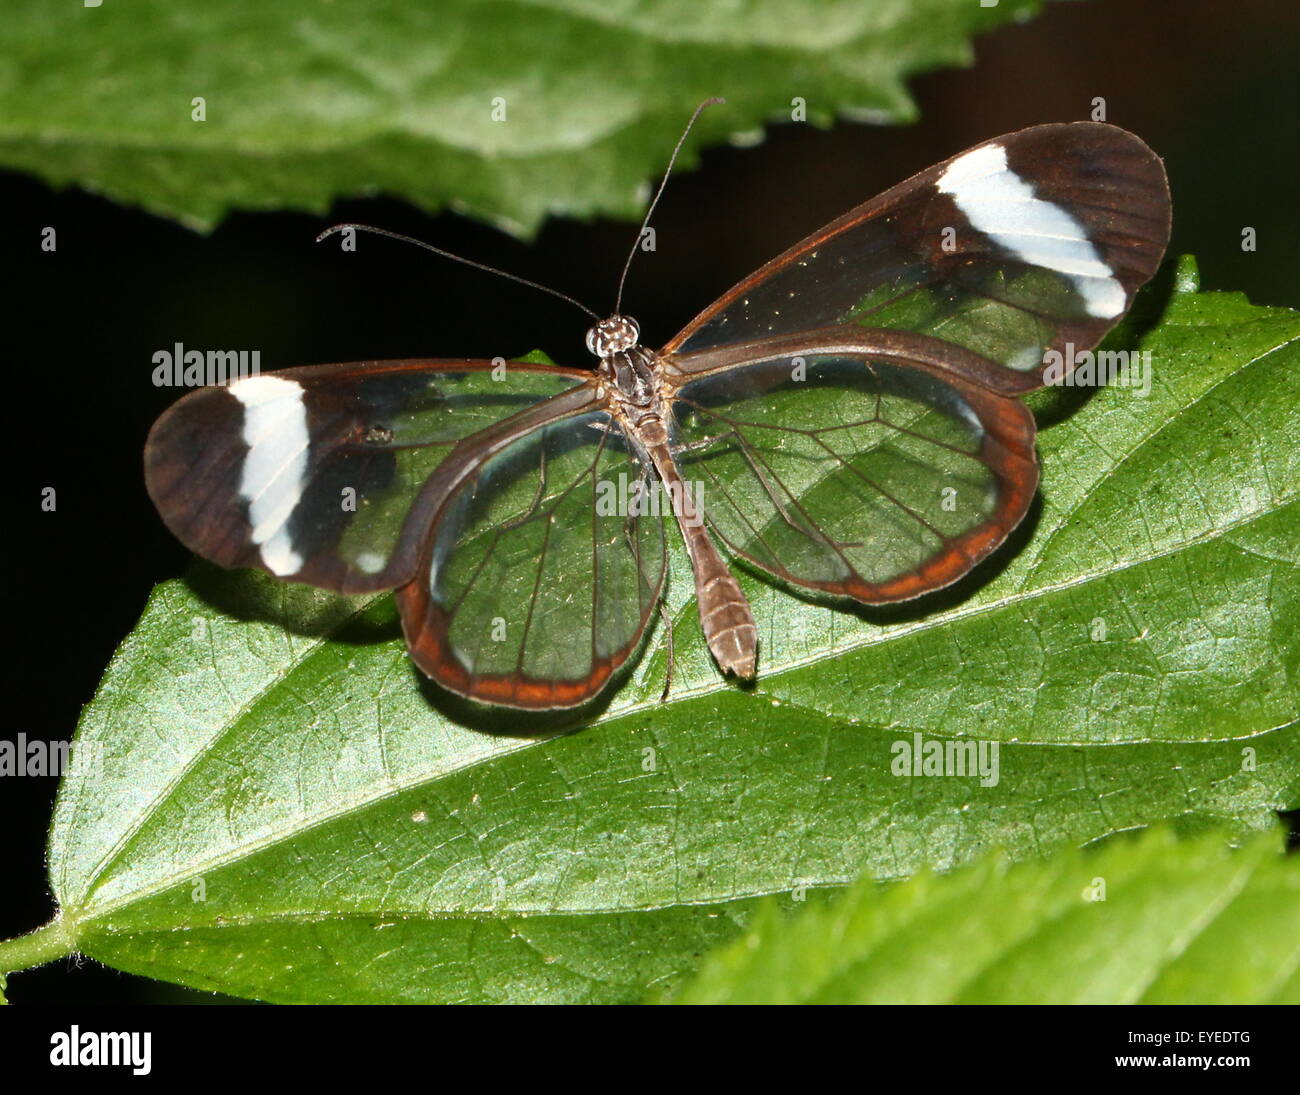 Glasswinged butterfly or Clearwing (Greta oto)  posing on a leaf, dorsal view Stock Photo